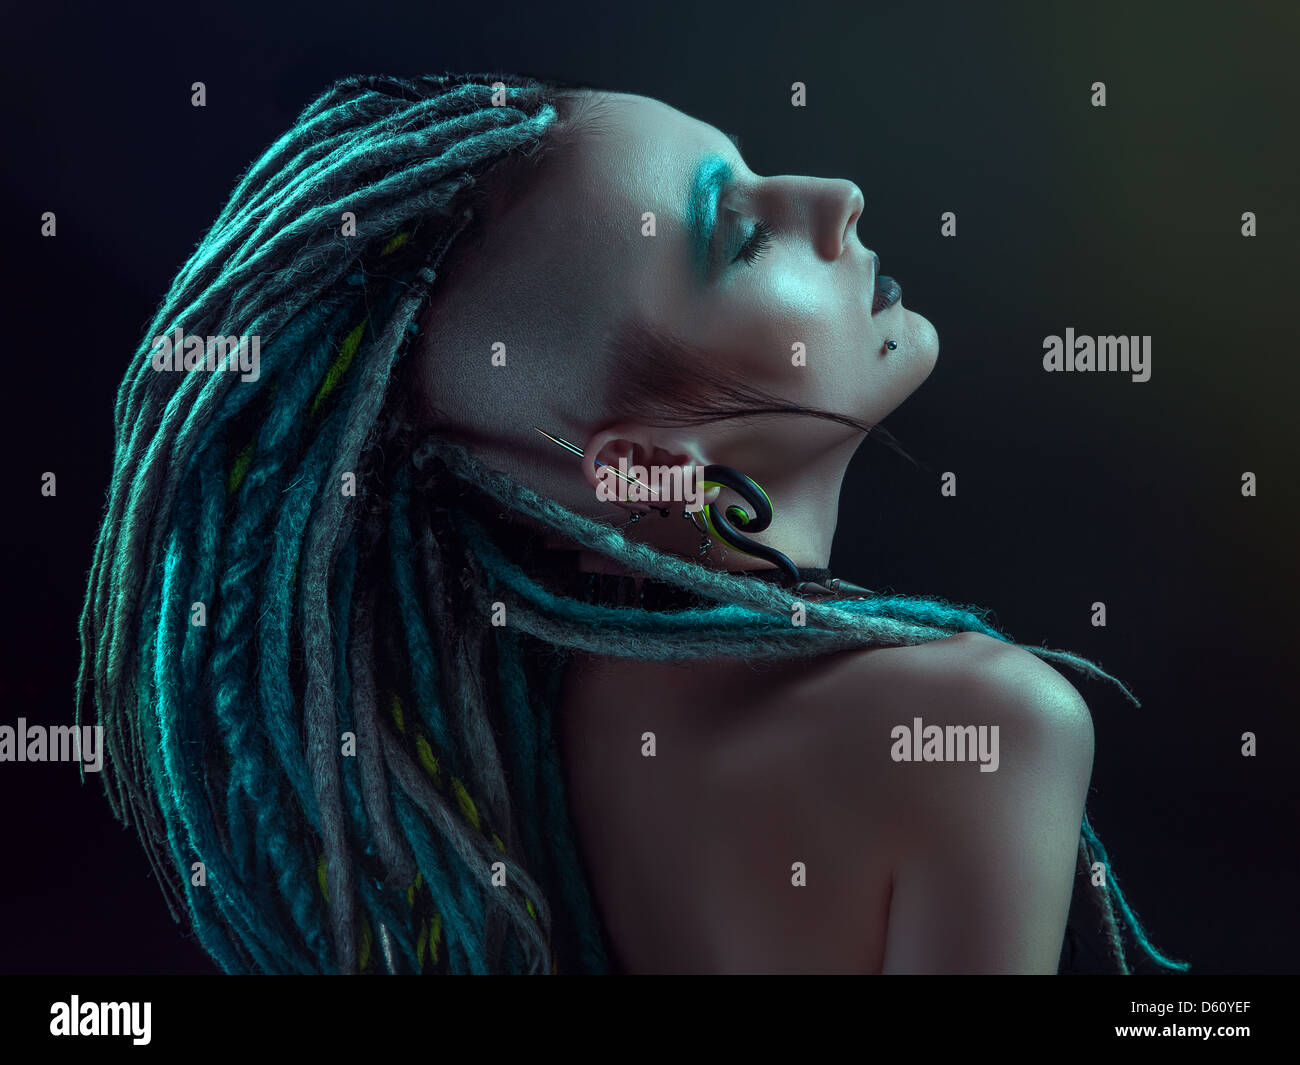 Young woman with dreadlocks Stock Photo